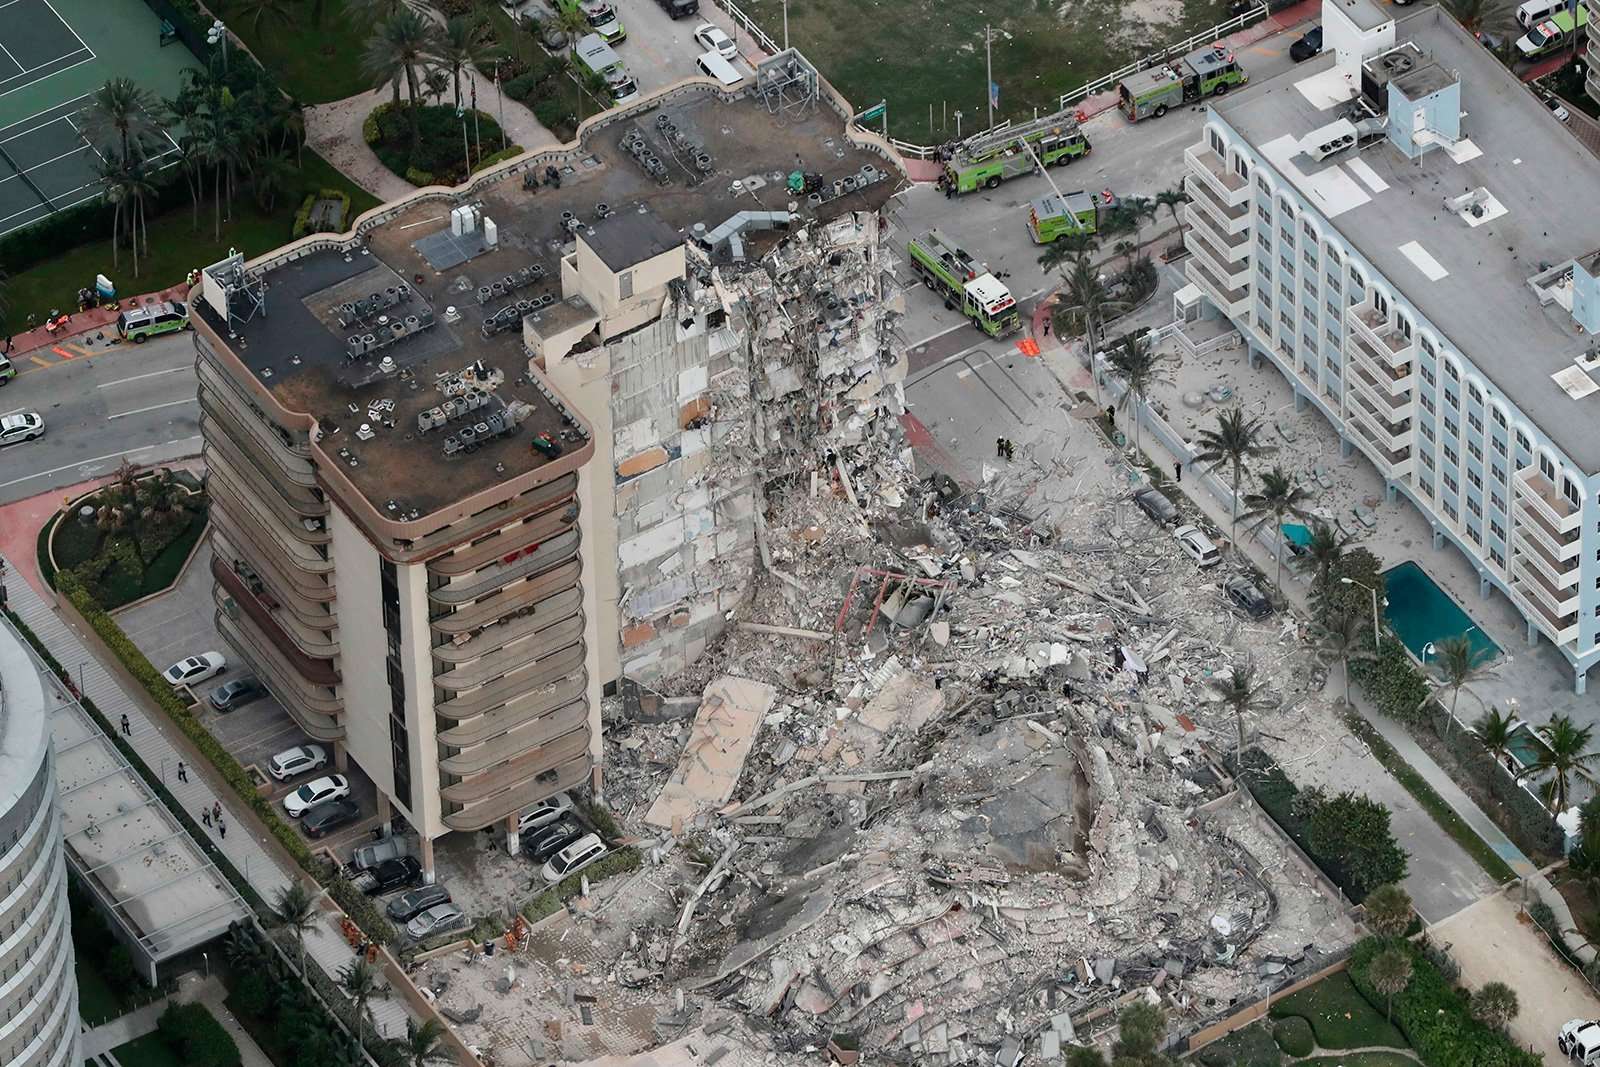 The Death Toll From a House Collapse in Florida Has Risen to 12